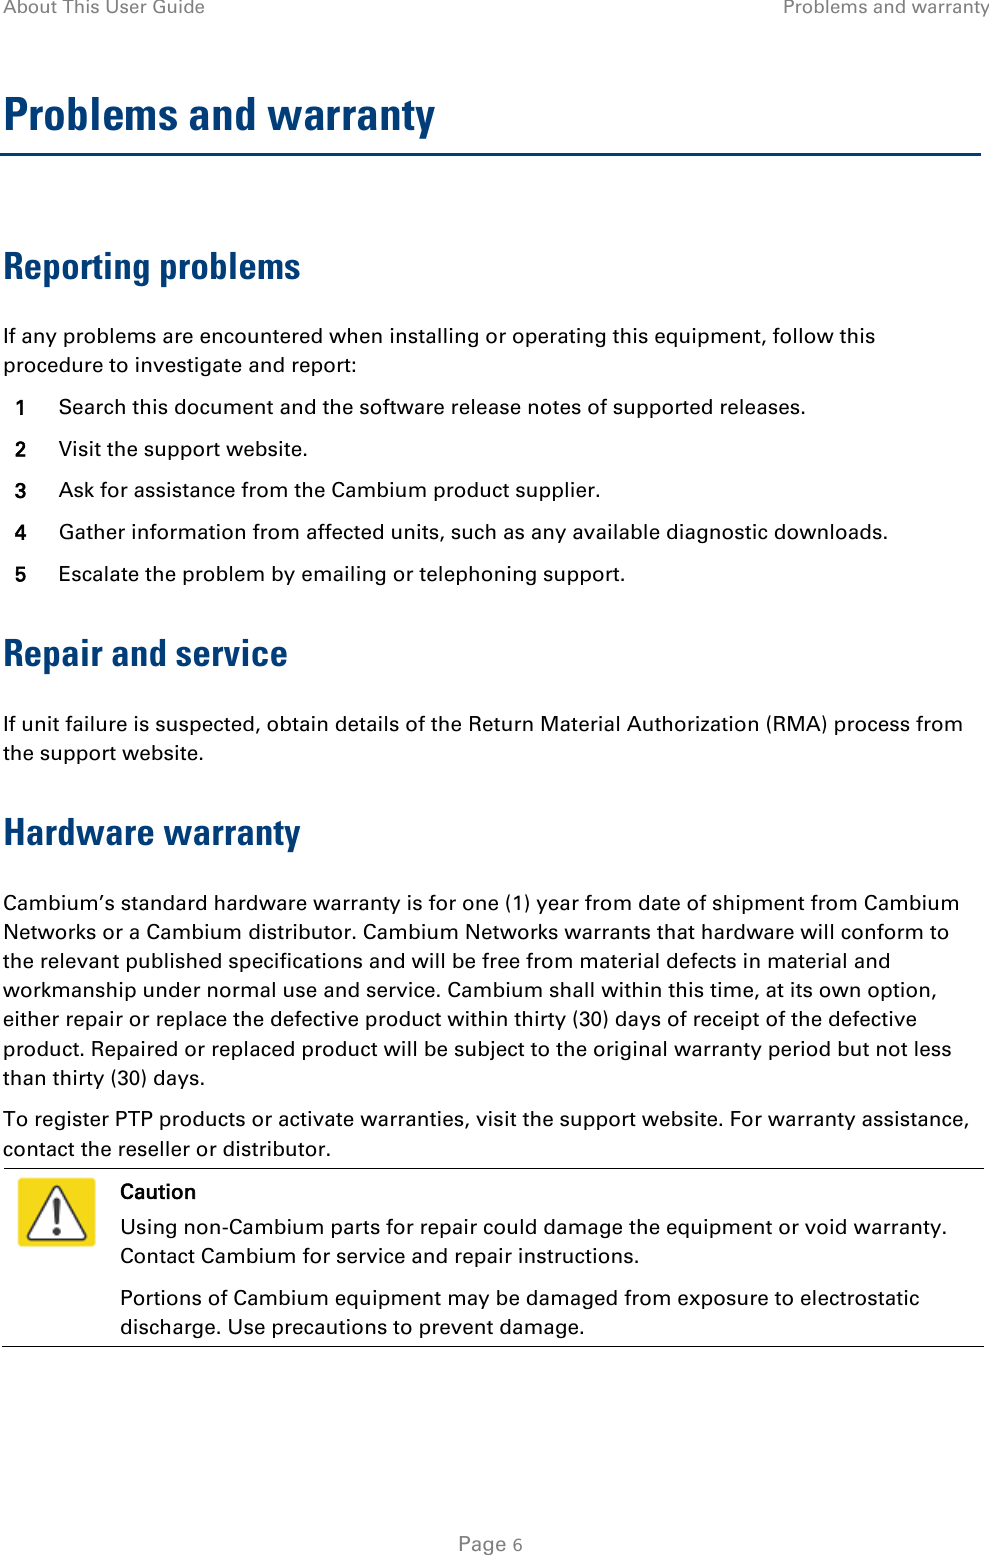 About This User Guide Problems and warranty  Problems and warranty Reporting problems If any problems are encountered when installing or operating this equipment, follow this procedure to investigate and report: 1 Search this document and the software release notes of supported releases. 2 Visit the support website. 3 Ask for assistance from the Cambium product supplier. 4 Gather information from affected units, such as any available diagnostic downloads. 5 Escalate the problem by emailing or telephoning support. Repair and service If unit failure is suspected, obtain details of the Return Material Authorization (RMA) process from the support website. Hardware warranty Cambium’s standard hardware warranty is for one (1) year from date of shipment from Cambium Networks or a Cambium distributor. Cambium Networks warrants that hardware will conform to the relevant published specifications and will be free from material defects in material and workmanship under normal use and service. Cambium shall within this time, at its own option, either repair or replace the defective product within thirty (30) days of receipt of the defective product. Repaired or replaced product will be subject to the original warranty period but not less than thirty (30) days. To register PTP products or activate warranties, visit the support website. For warranty assistance, contact the reseller or distributor.  Caution Using non-Cambium parts for repair could damage the equipment or void warranty. Contact Cambium for service and repair instructions. Portions of Cambium equipment may be damaged from exposure to electrostatic discharge. Use precautions to prevent damage.   Page 6 